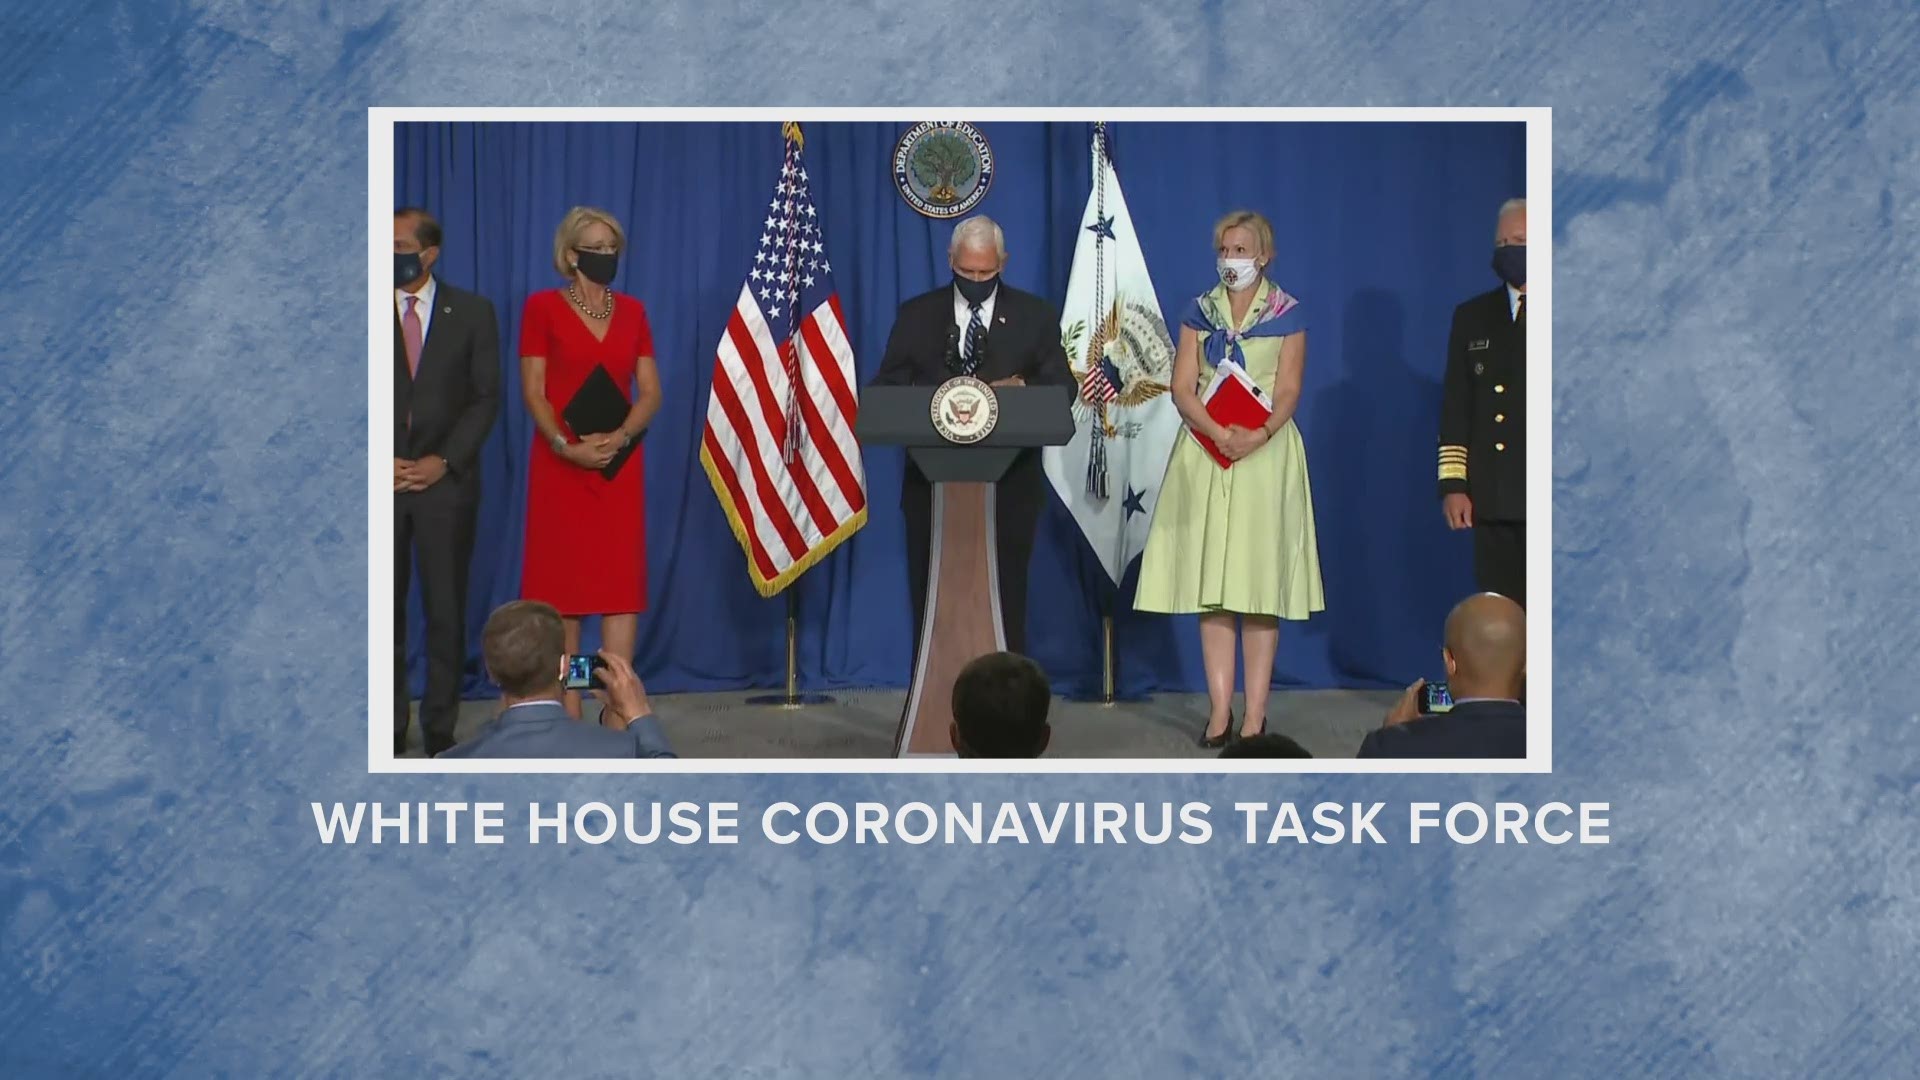 A 359 page report prepared for the White House Coronavirus Task Force names 18 "red zone" states where infections are rapidly increasing.